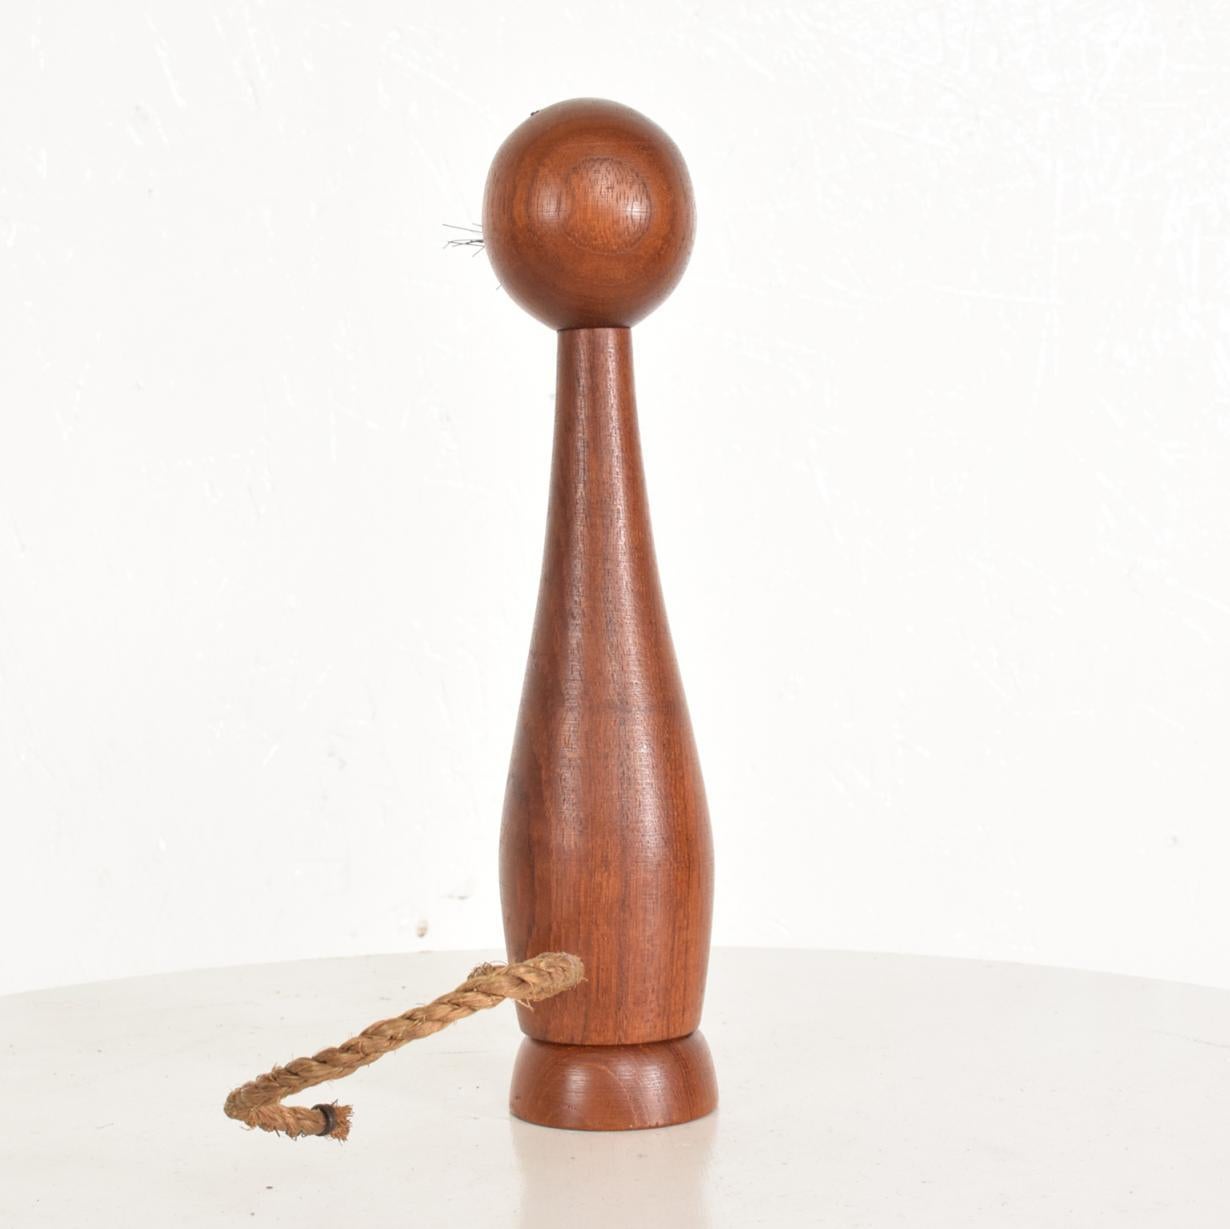 For your consideration, a midcentury Danish modern teak bottle opener cat.

Unmarked. 

Dimensions: 8 3/4